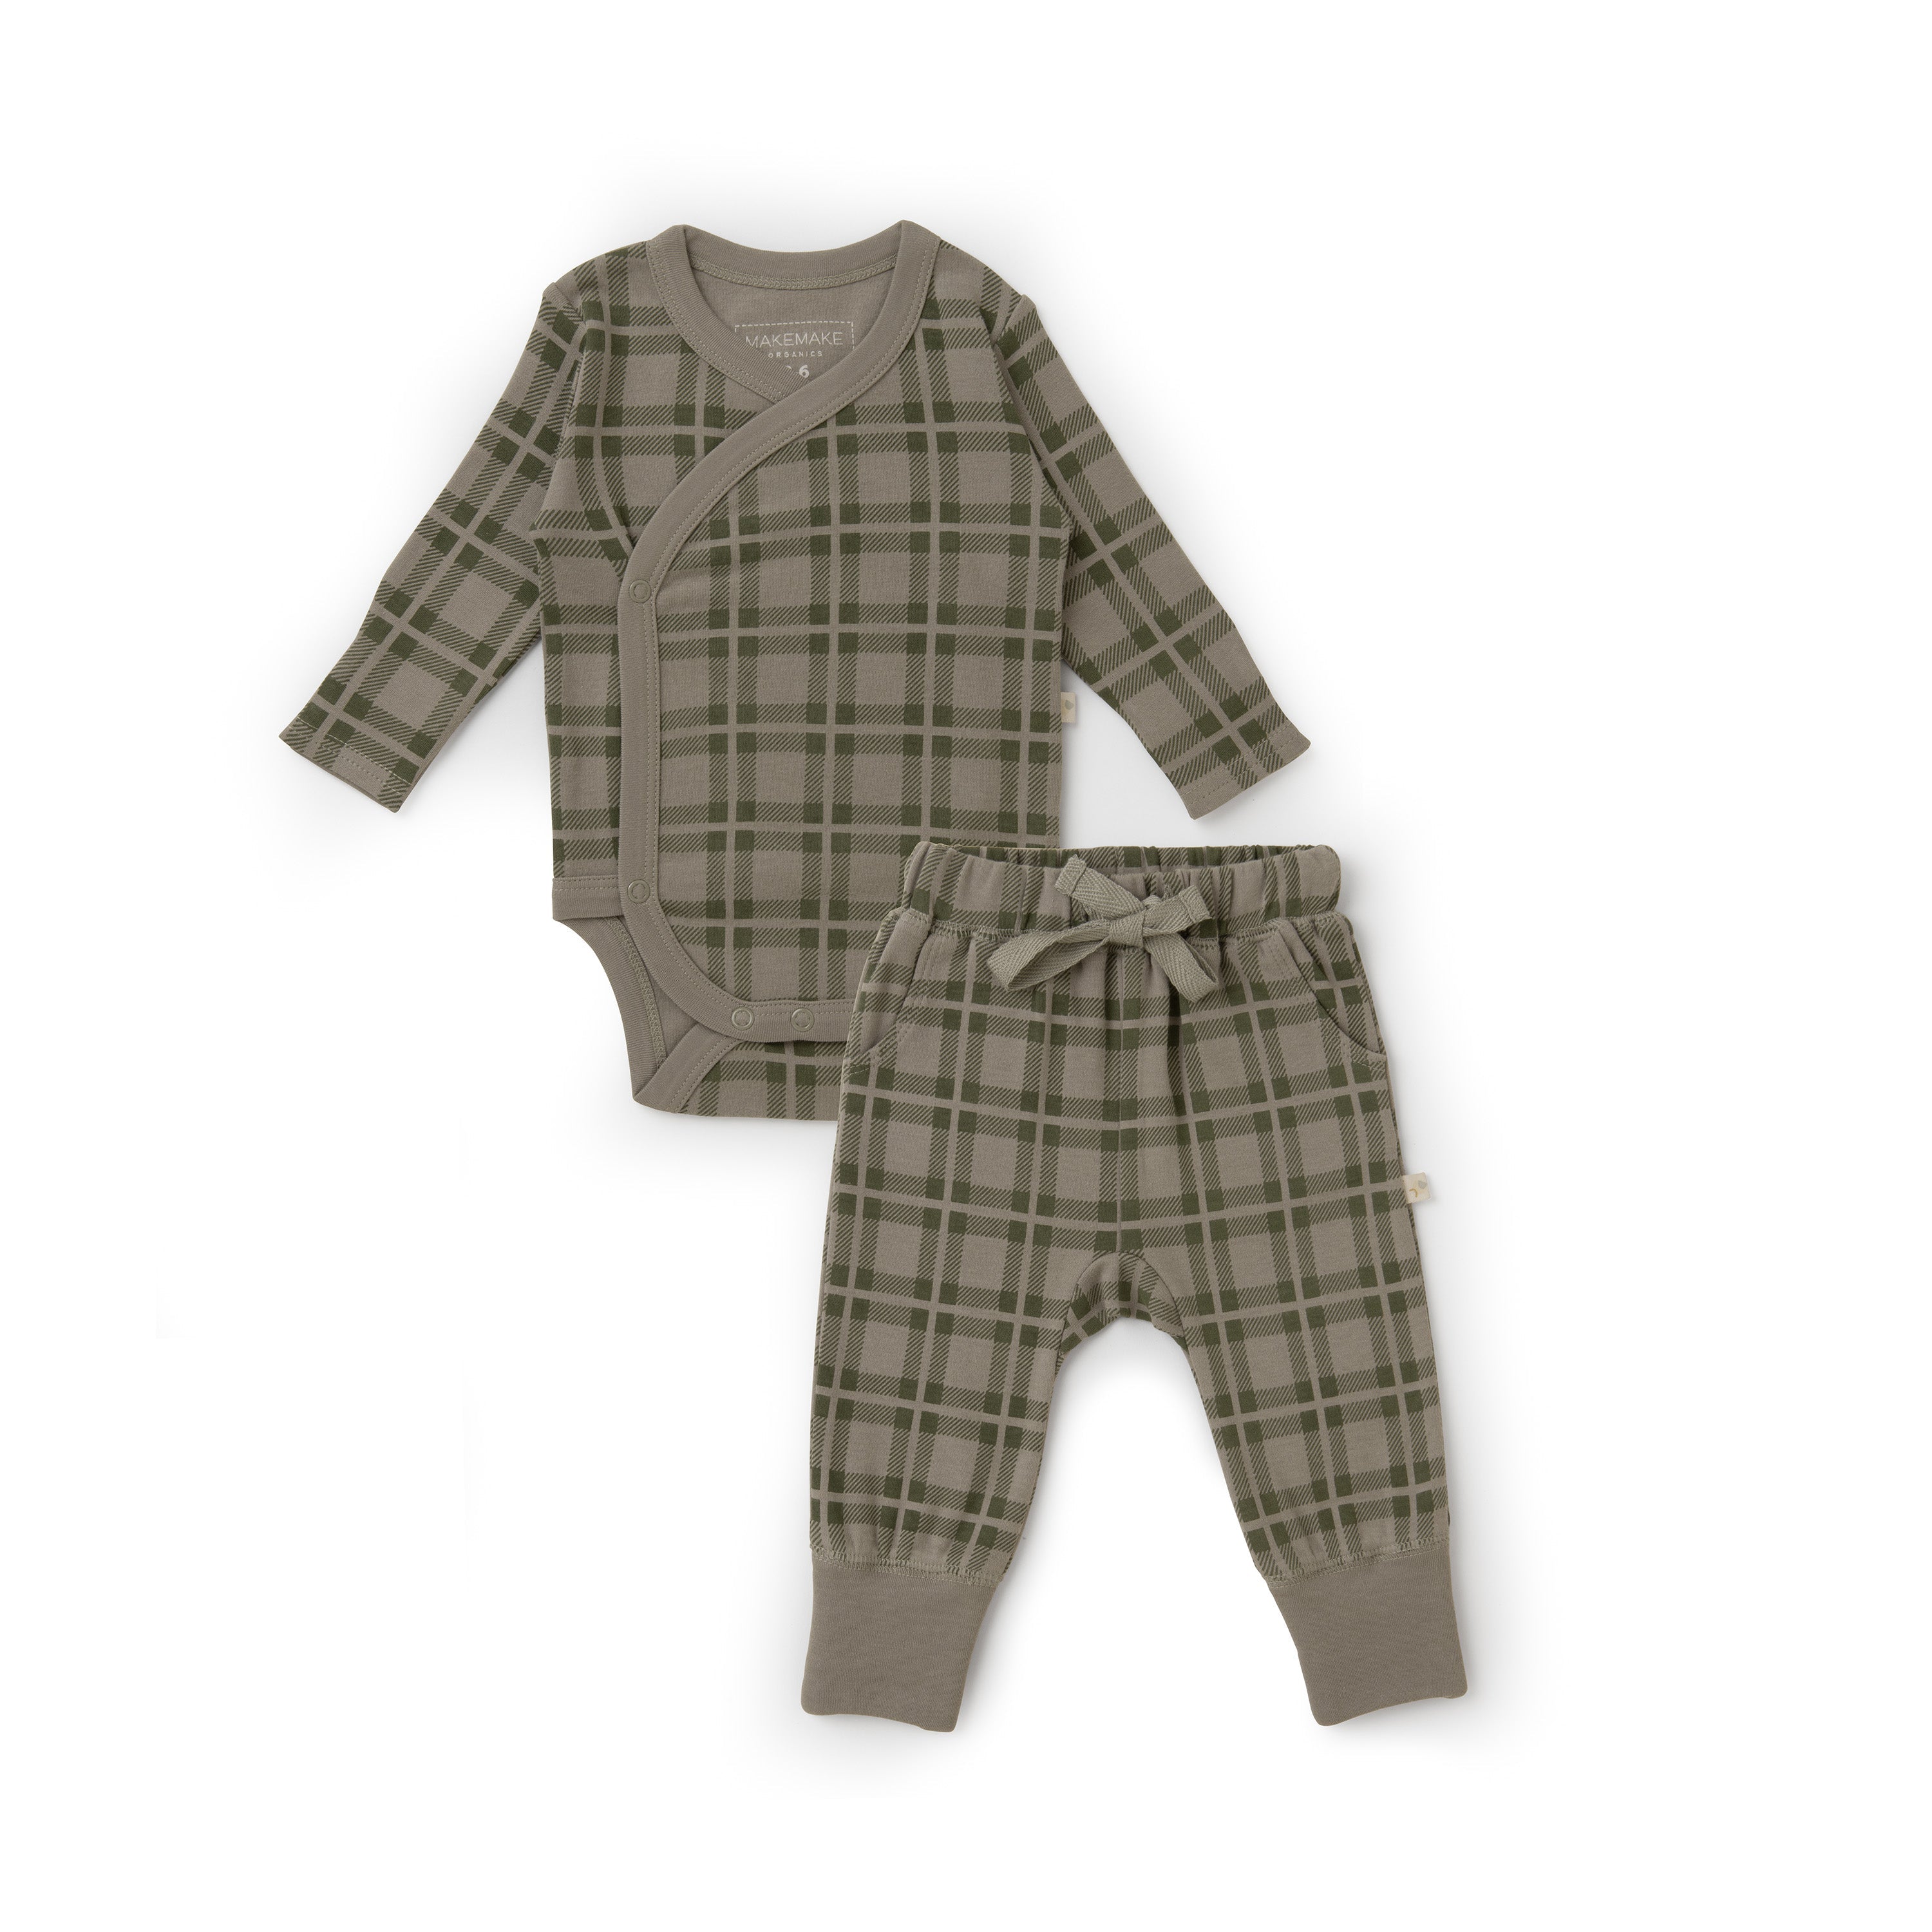 Organic Baby green and beige plaid baby outfit consisting of a kimono top and pants, displayed flat on a white background.